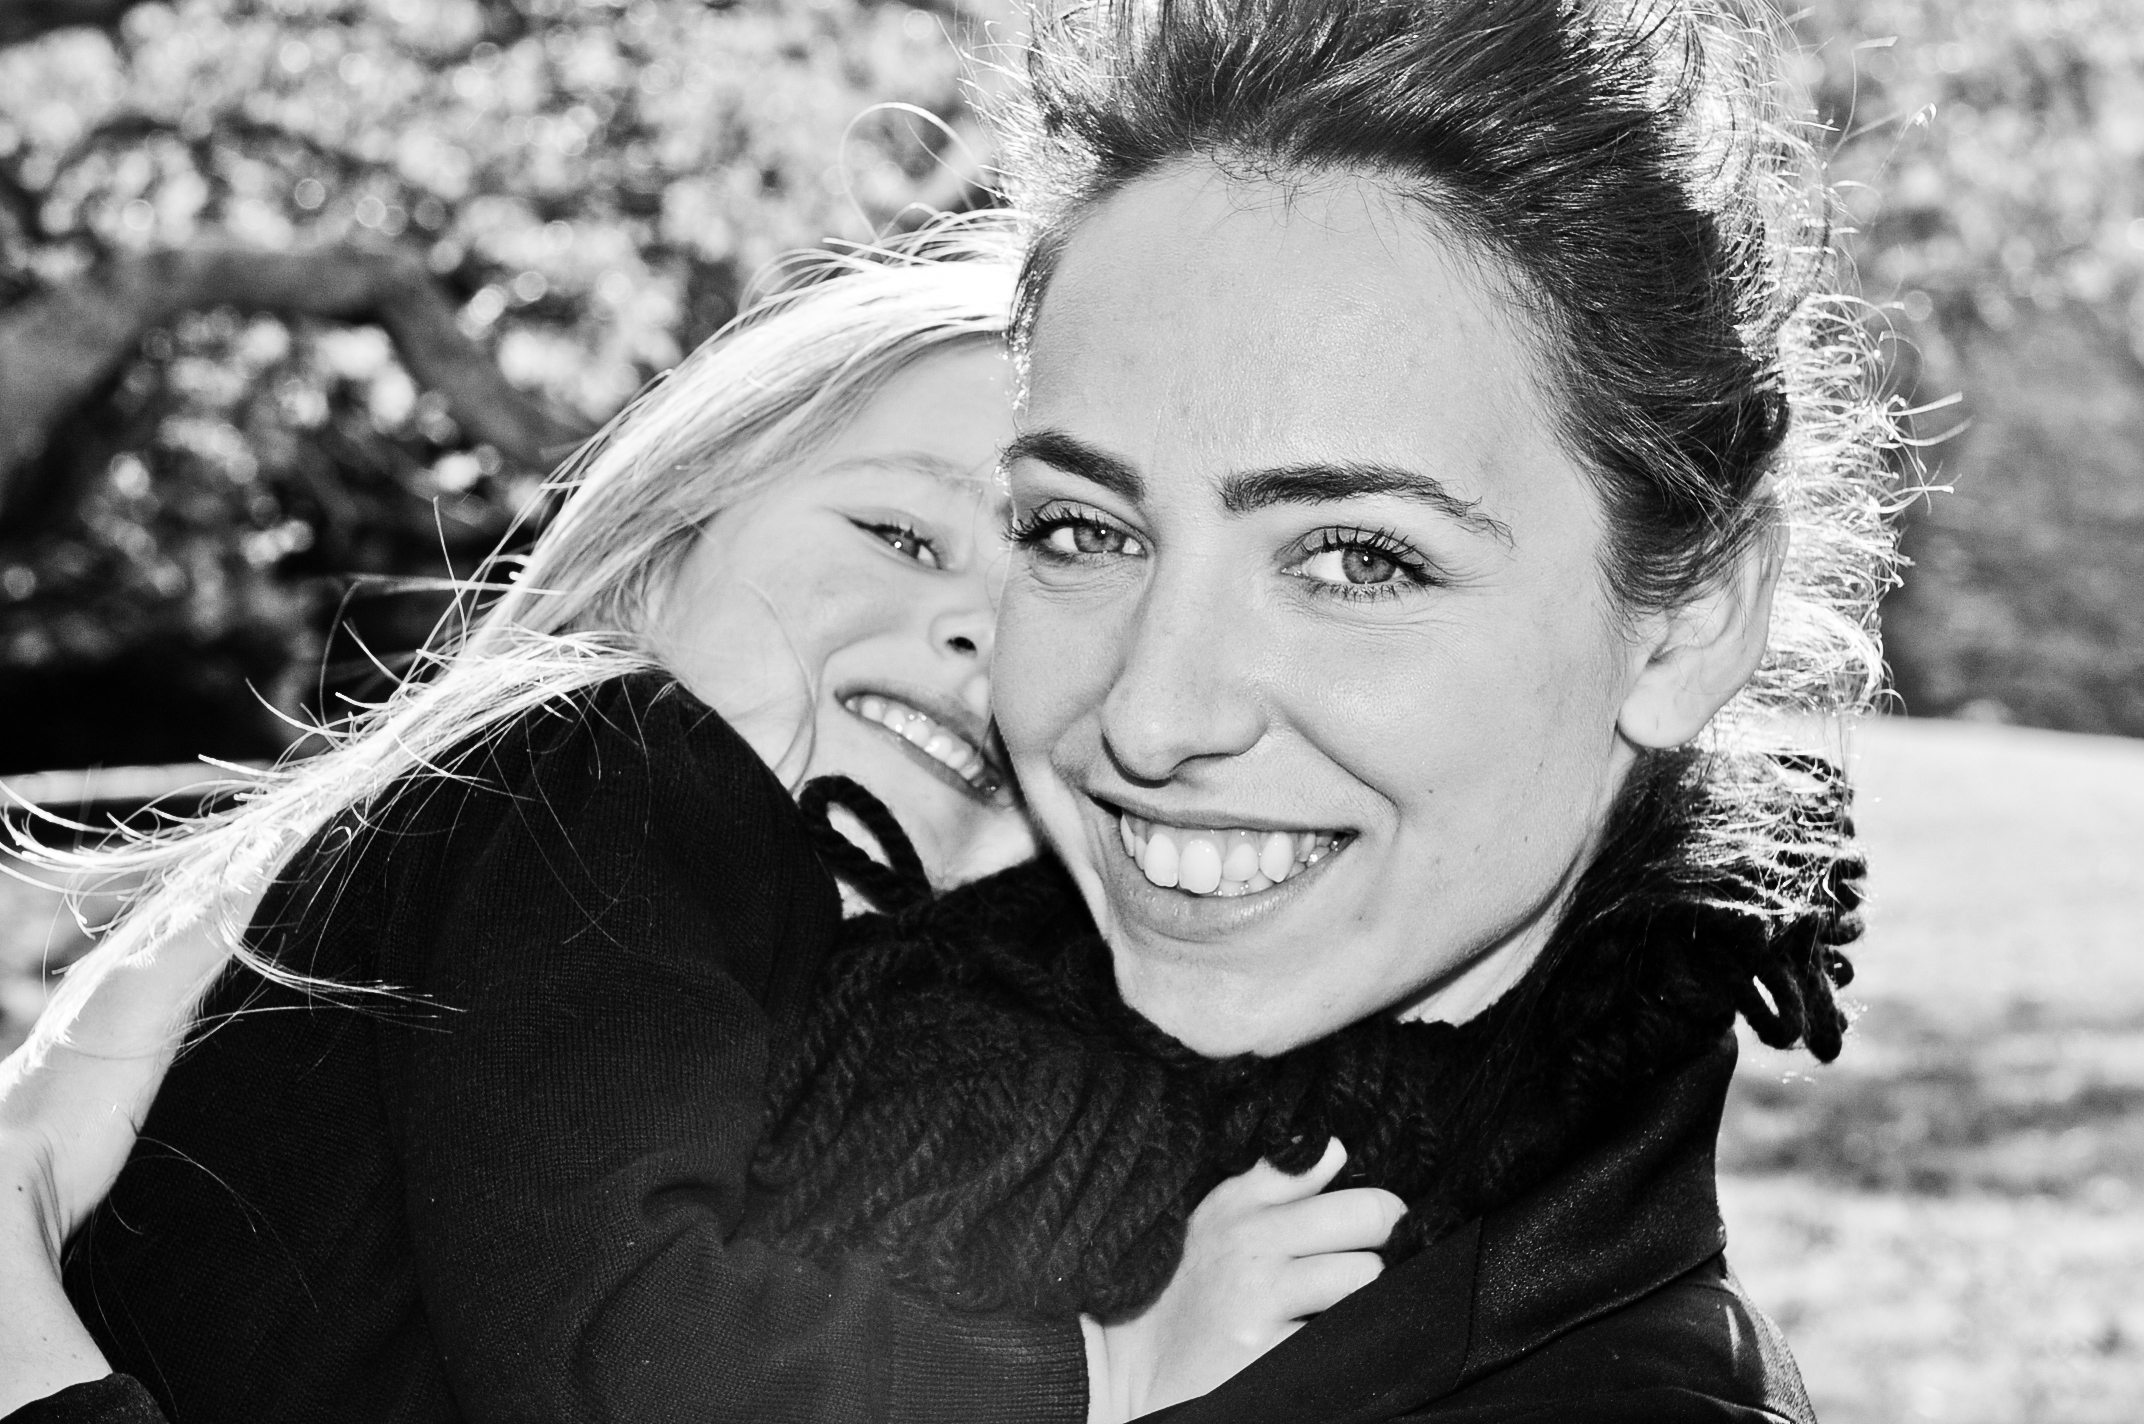 Professional portrait of happy mum and daughter black and white in One Tree hill Park, Auckland, New Zealand